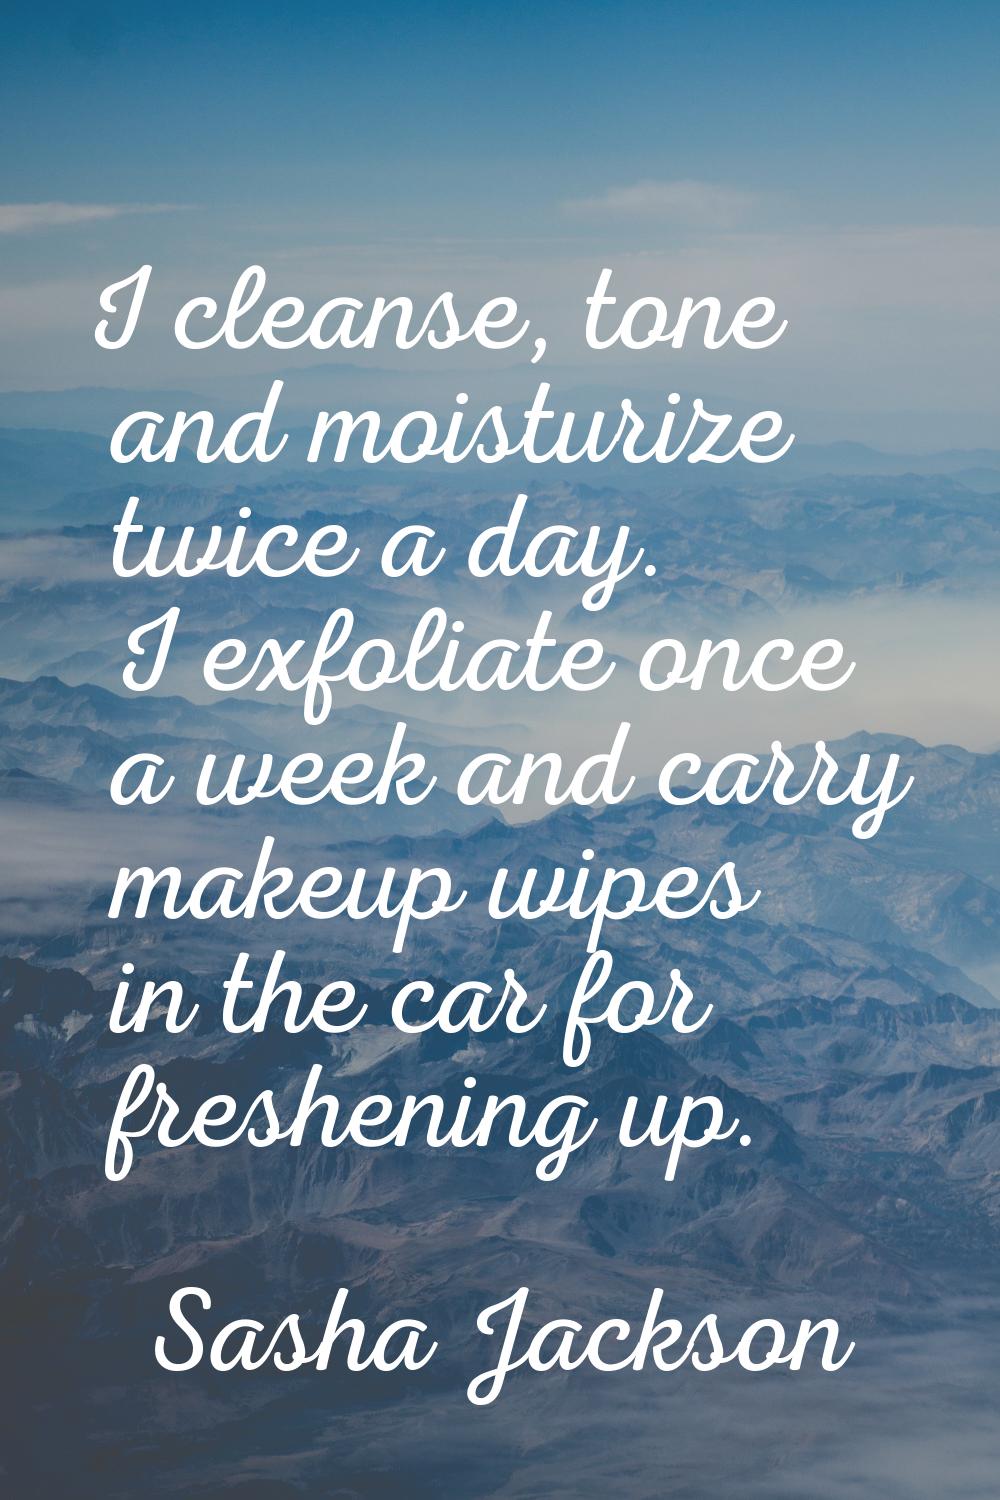 I cleanse, tone and moisturize twice a day. I exfoliate once a week and carry makeup wipes in the c